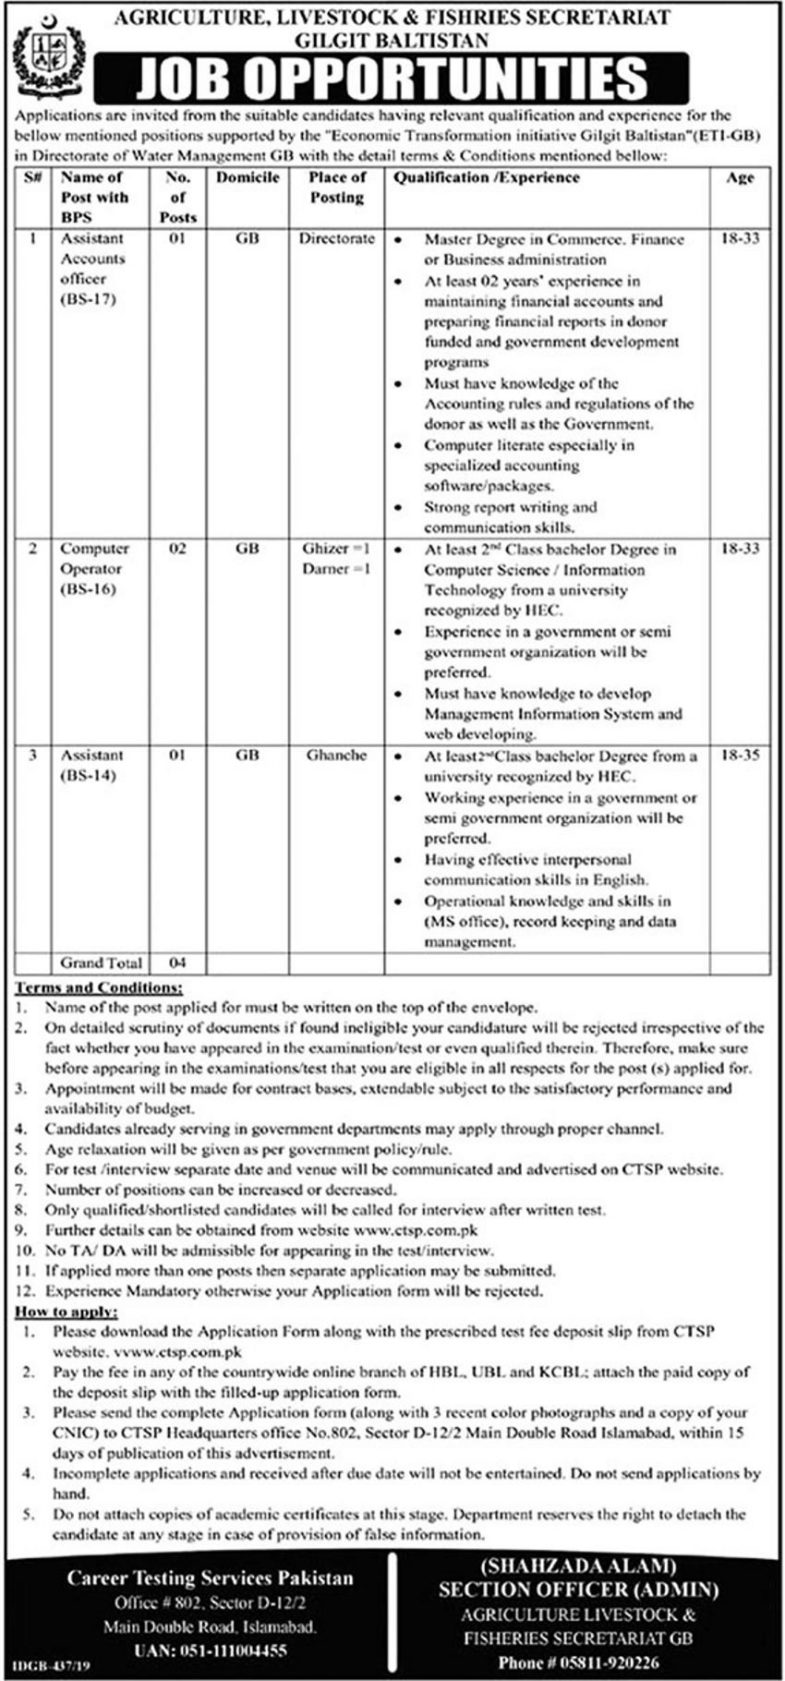 Agriculture, Livestock & Fisheries Department Gilgit-Baltistan Jobs 2019 for Computer Operators, Assistant Accounts Officer and Assistant Posts